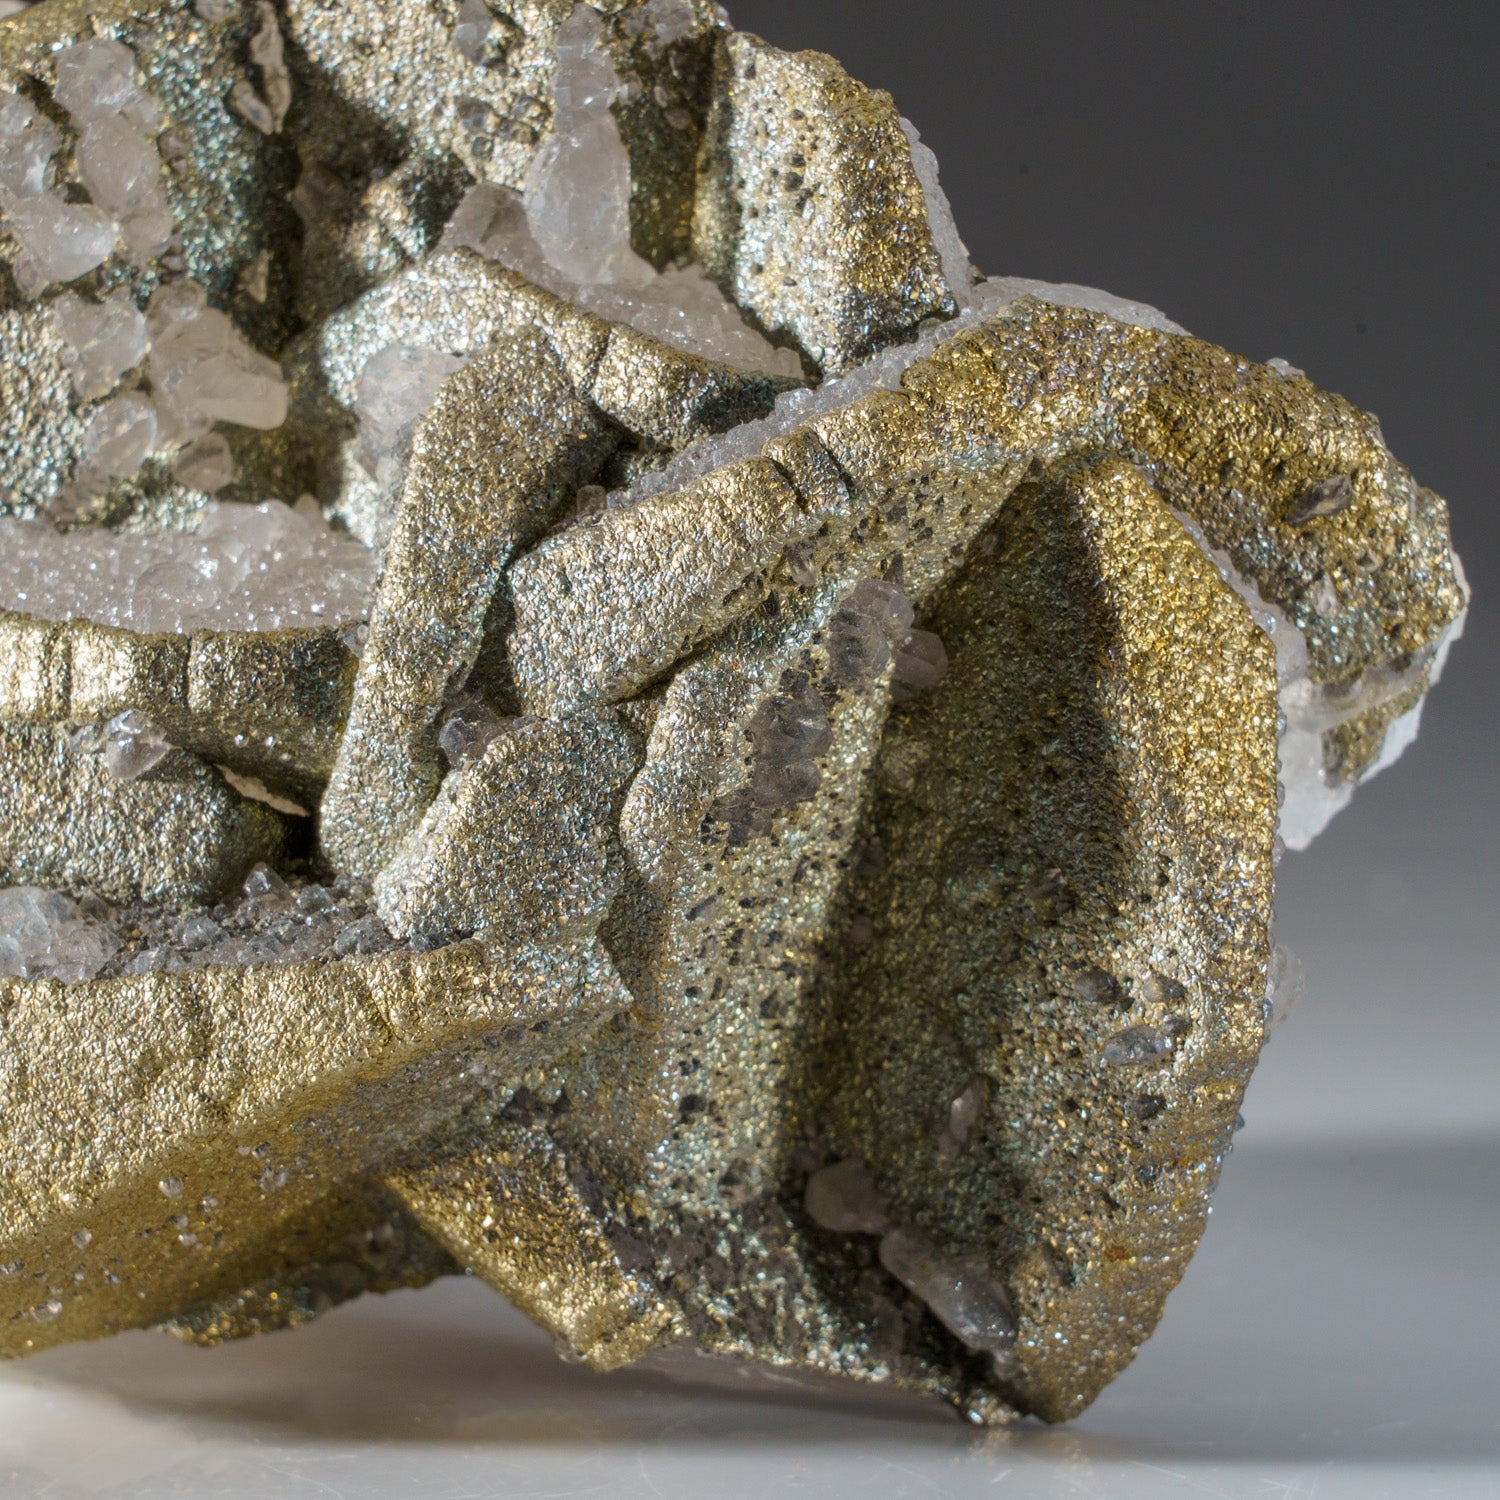 Pyrite on Calcite from from Edong Mining District, Daye, Hubei, China